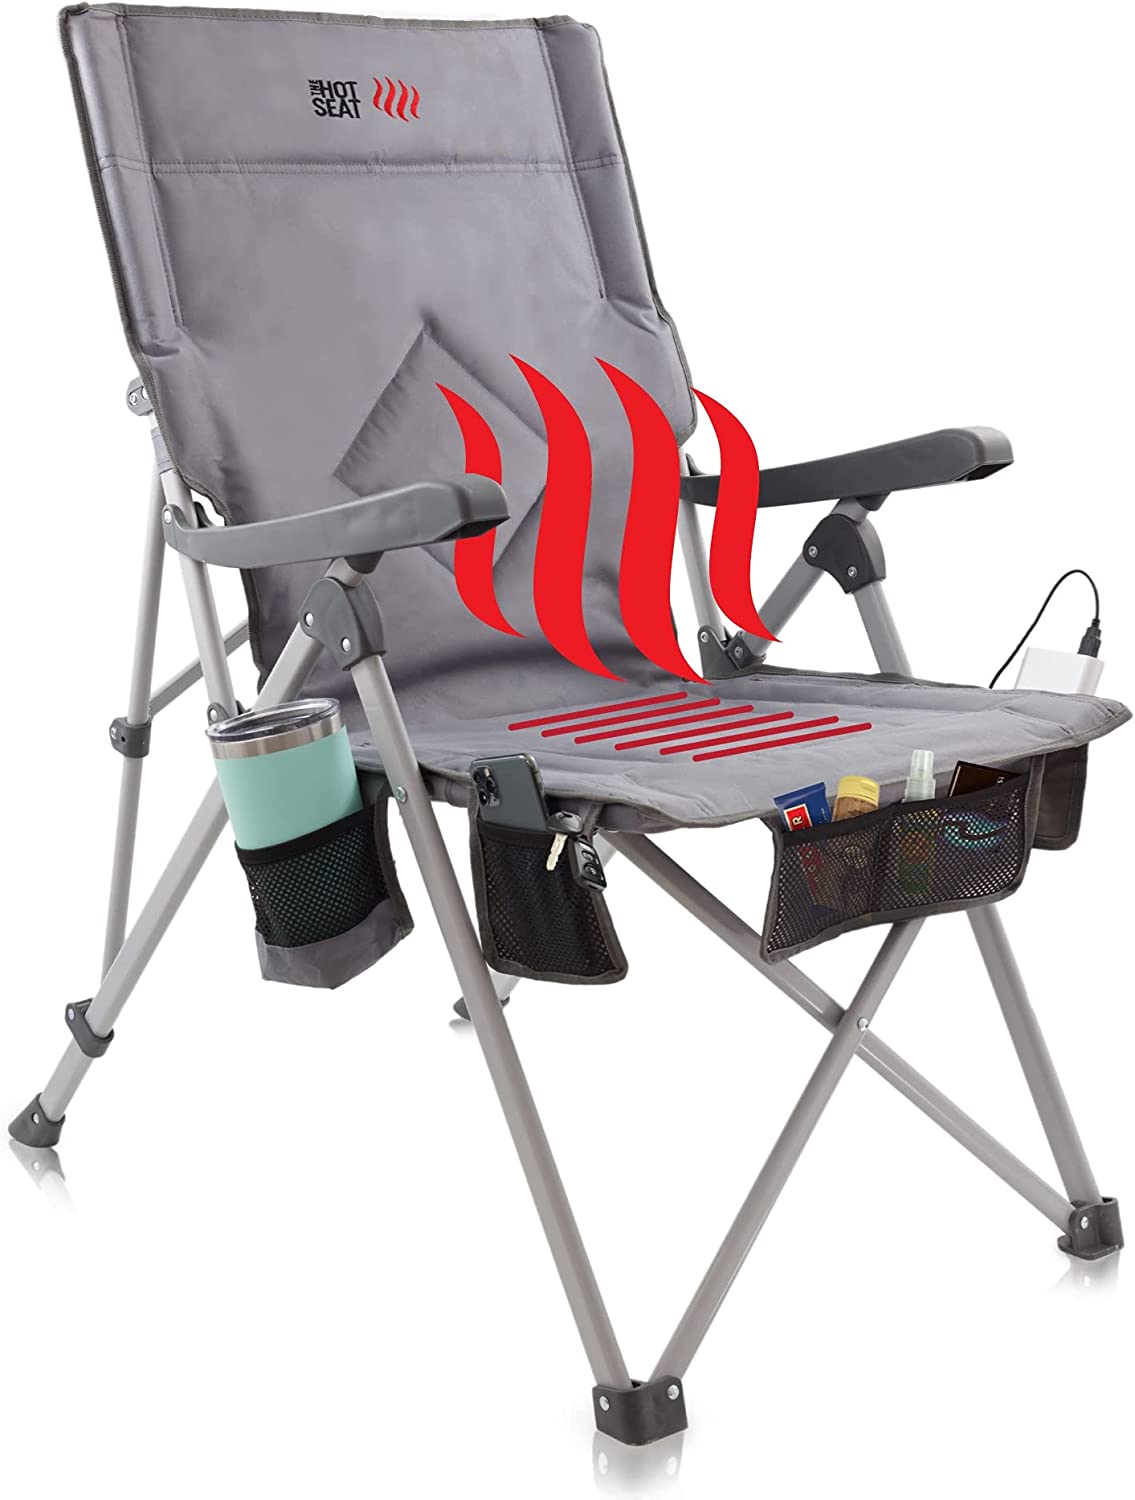 POP Design The Hot Seat, USB Heated Portable Camping Chair, Perfect for Outdoor, Sports, Beach, or Picnics. Extra-Large Armrests, Travel Bag, 5 Pockets, Cup Holder (Battery Pack NOT Included)